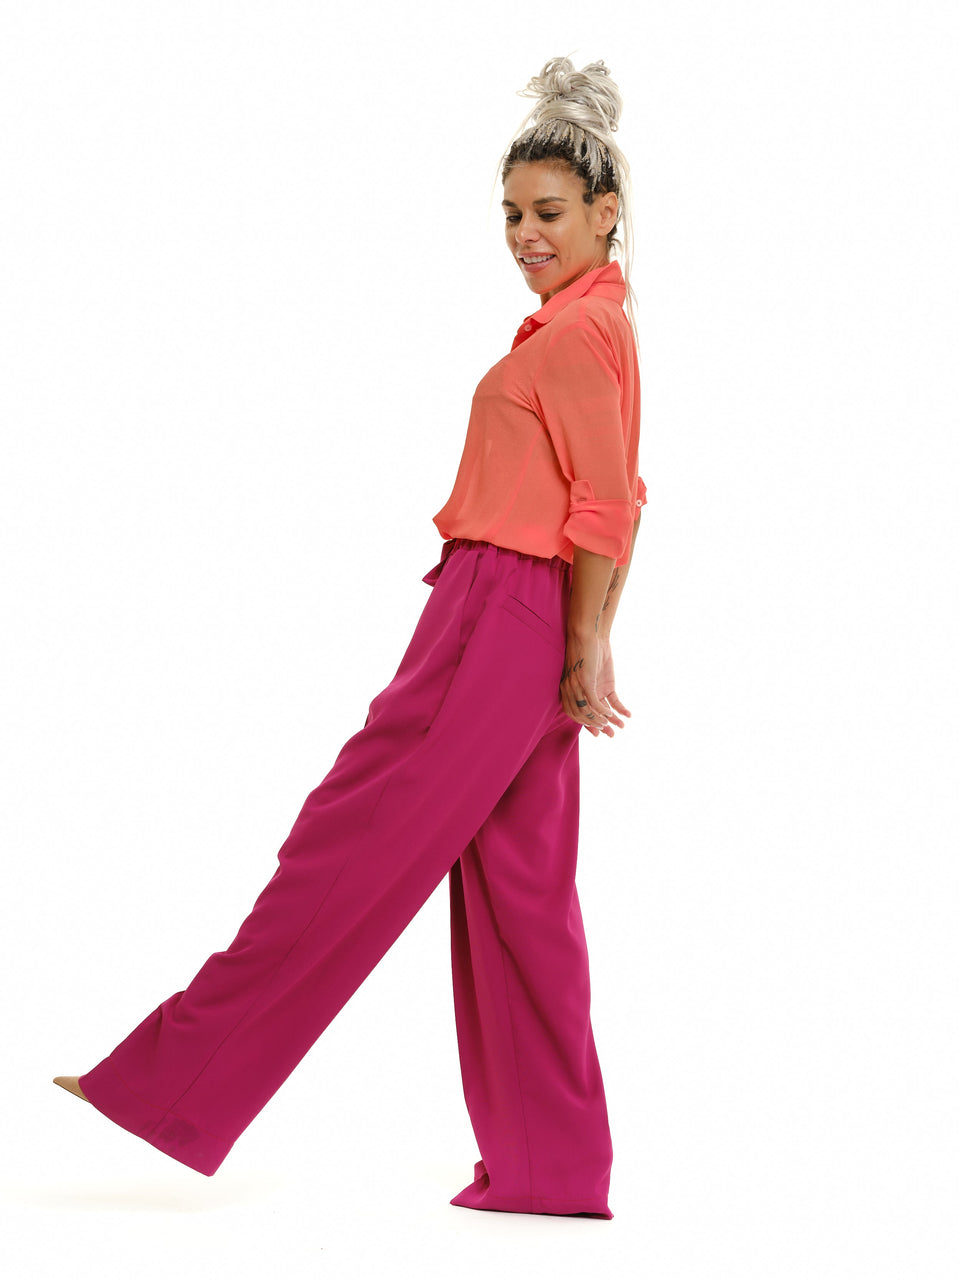 NEON CORAL TOP + MAGENTA PANTS OUTFIT SET